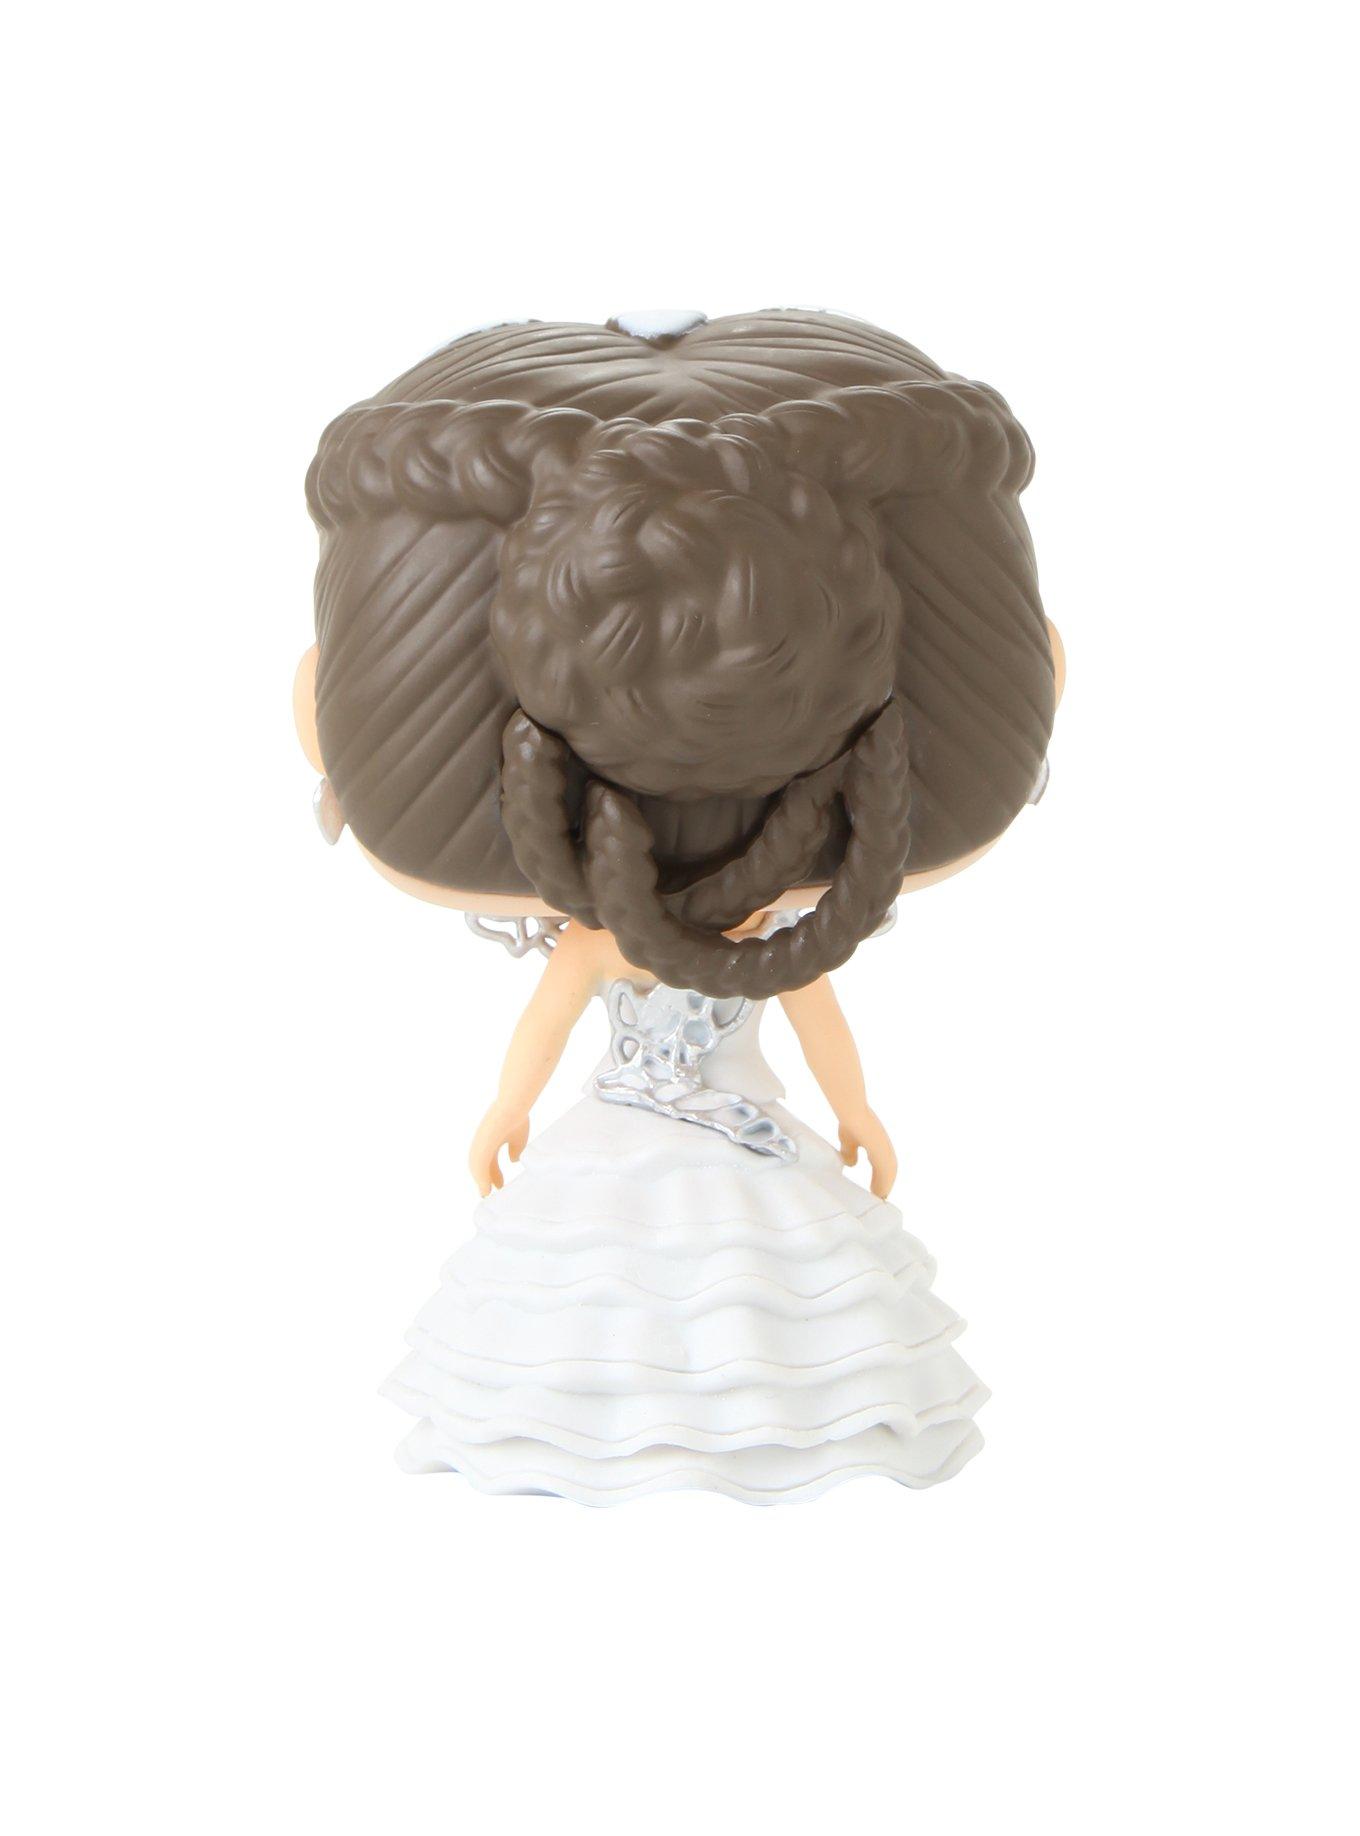 Funko POP Movies: The Hunger Games - Wedding Day Katniss Action Figure